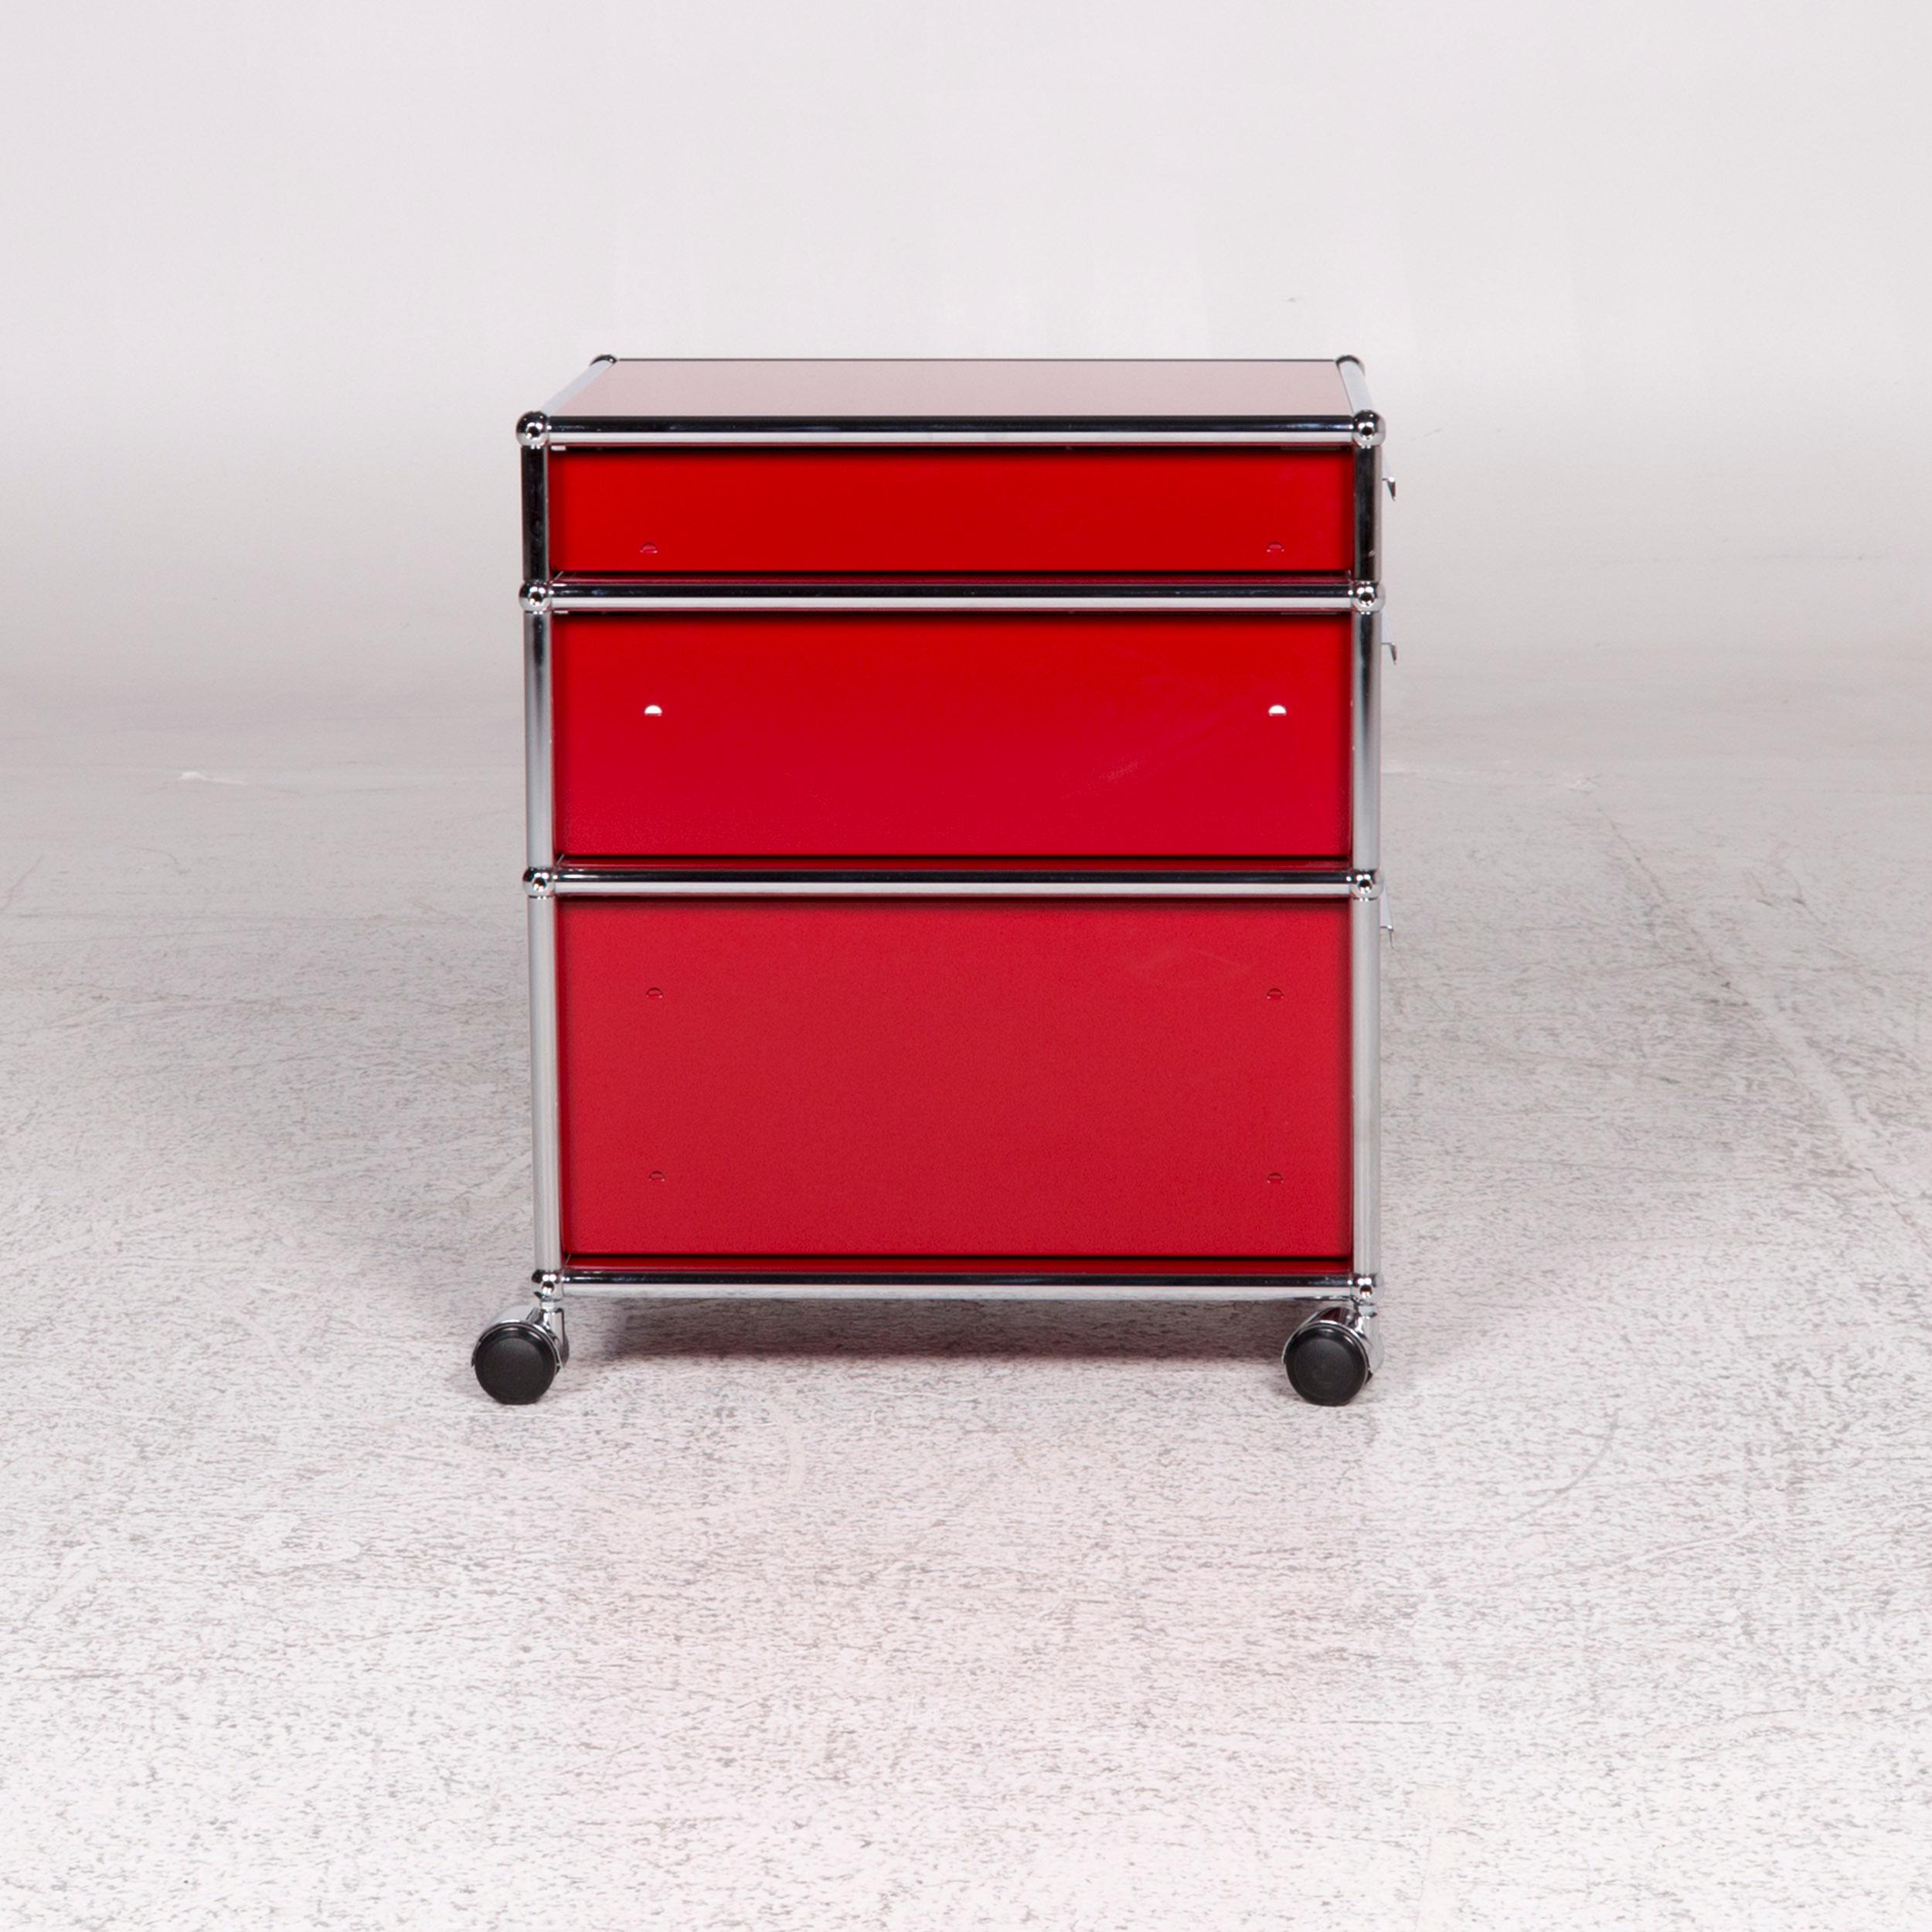 We bring to you an Usm Haller metal shelf sideboard rollcontainer set 3 drawers red.
   
 
 Product measurements in centimeters:
 
Depth 63
Width 42
Height 63.





   